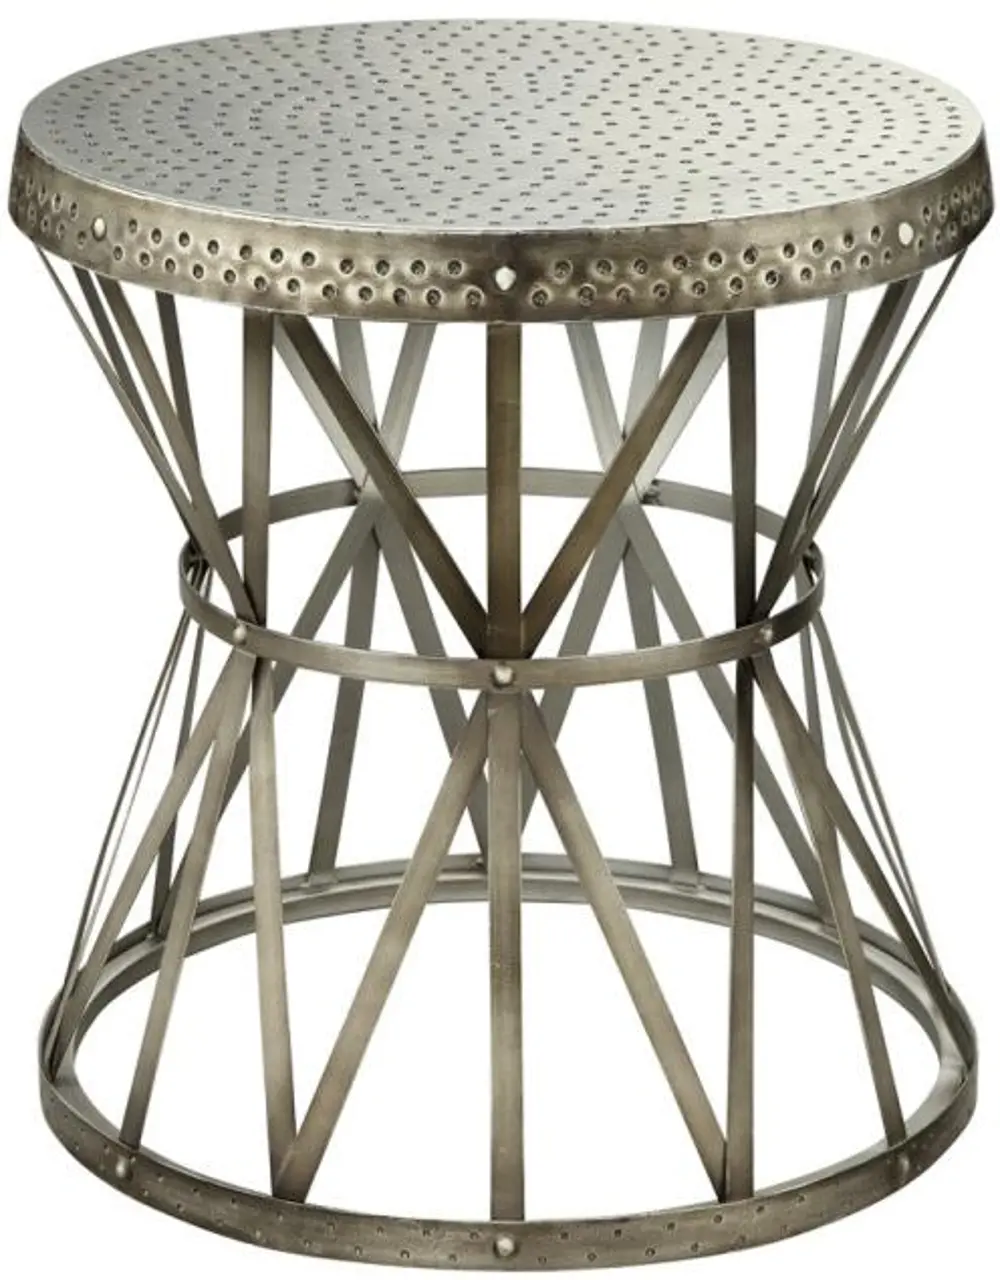 43329 Hammered Top Antique Nickel Metal Accent Table-1